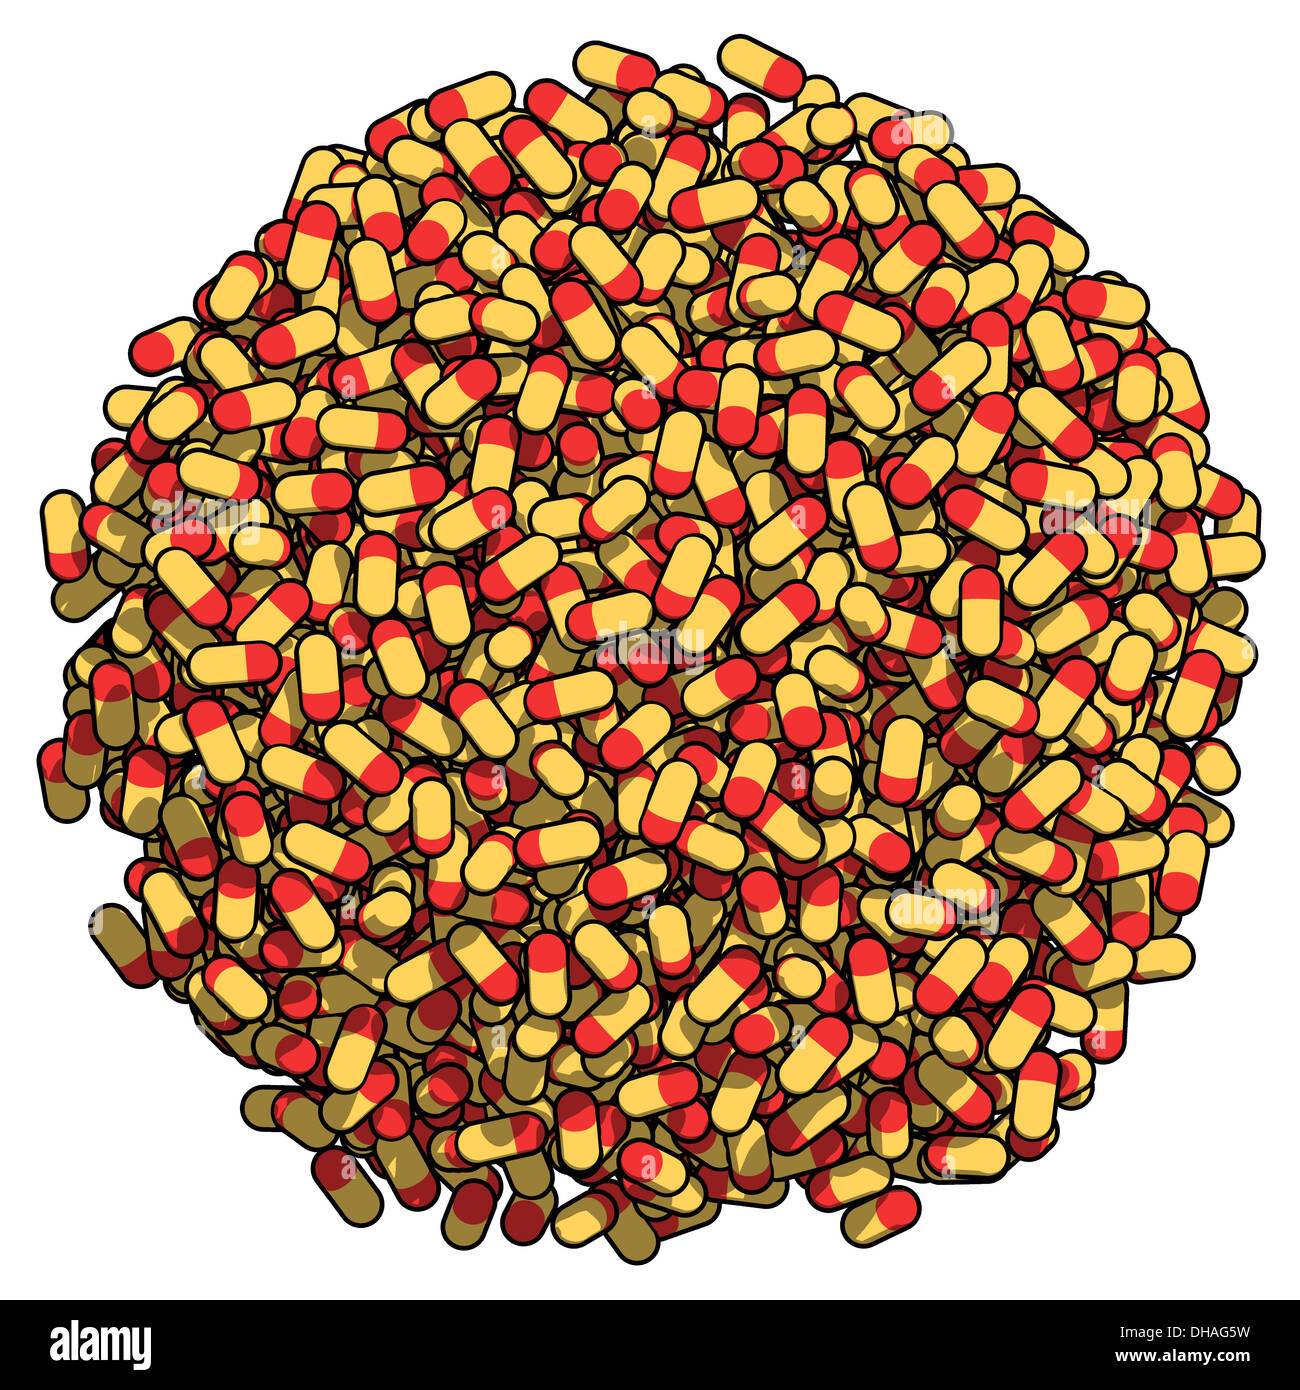 Two-piece capsules (pills), arranged in a sphere. Rendering, red and yellow on white background. Stock Photo